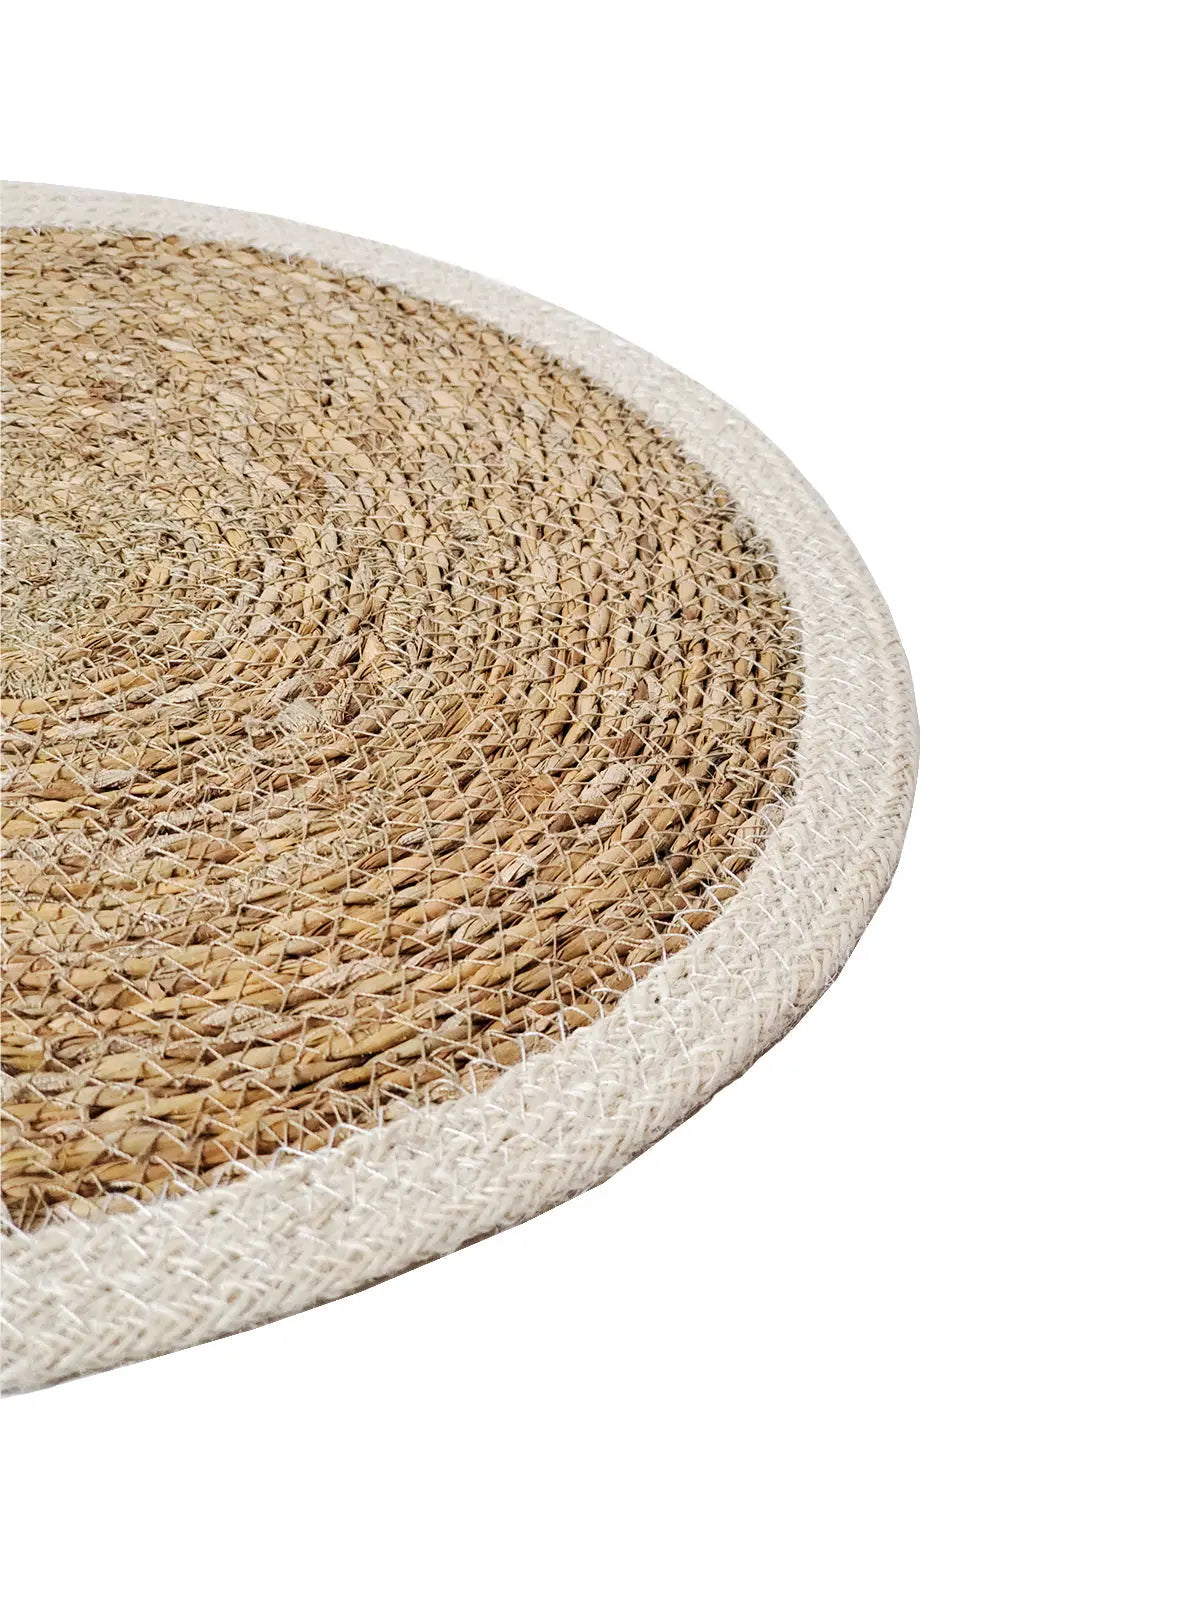 Seagrass Woven Placemats